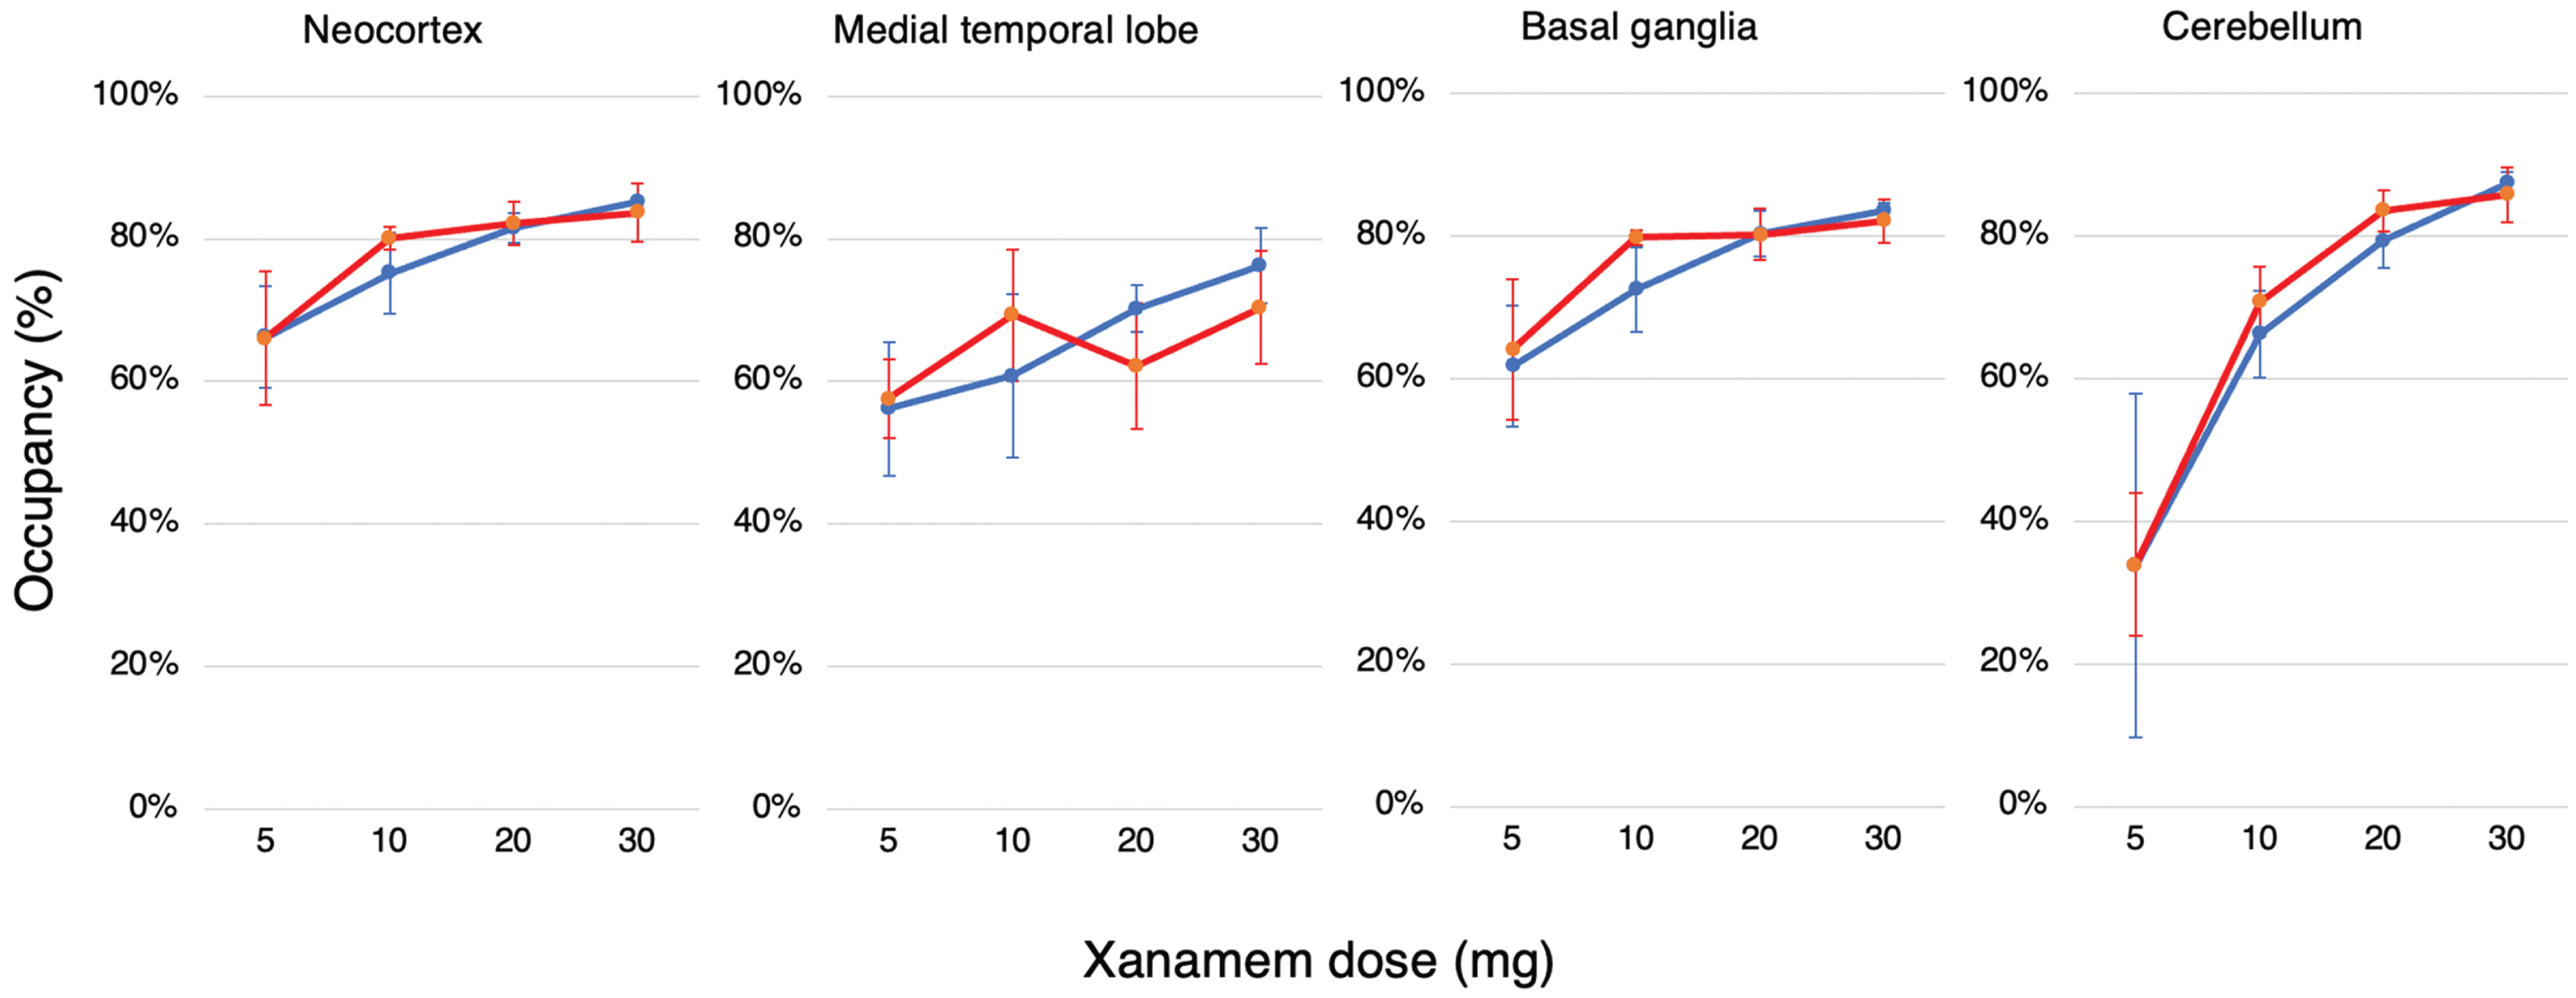 Dose Dependent Regional Brain Occupancy. Regional percent occupancy of 11β-HSD1 by Xanamem in each of the composite brain regions, the neocortex, medial temporal lobe, basal ganglia, and cerebellum across all four Xanamem mane doses (5 mg, 10 mg, 20 mg, 30 mg) for cognitively normal participants (blue line; N= 15) and participants with MCI/AD (red line; N= 16). Data expressed as median±IQR.